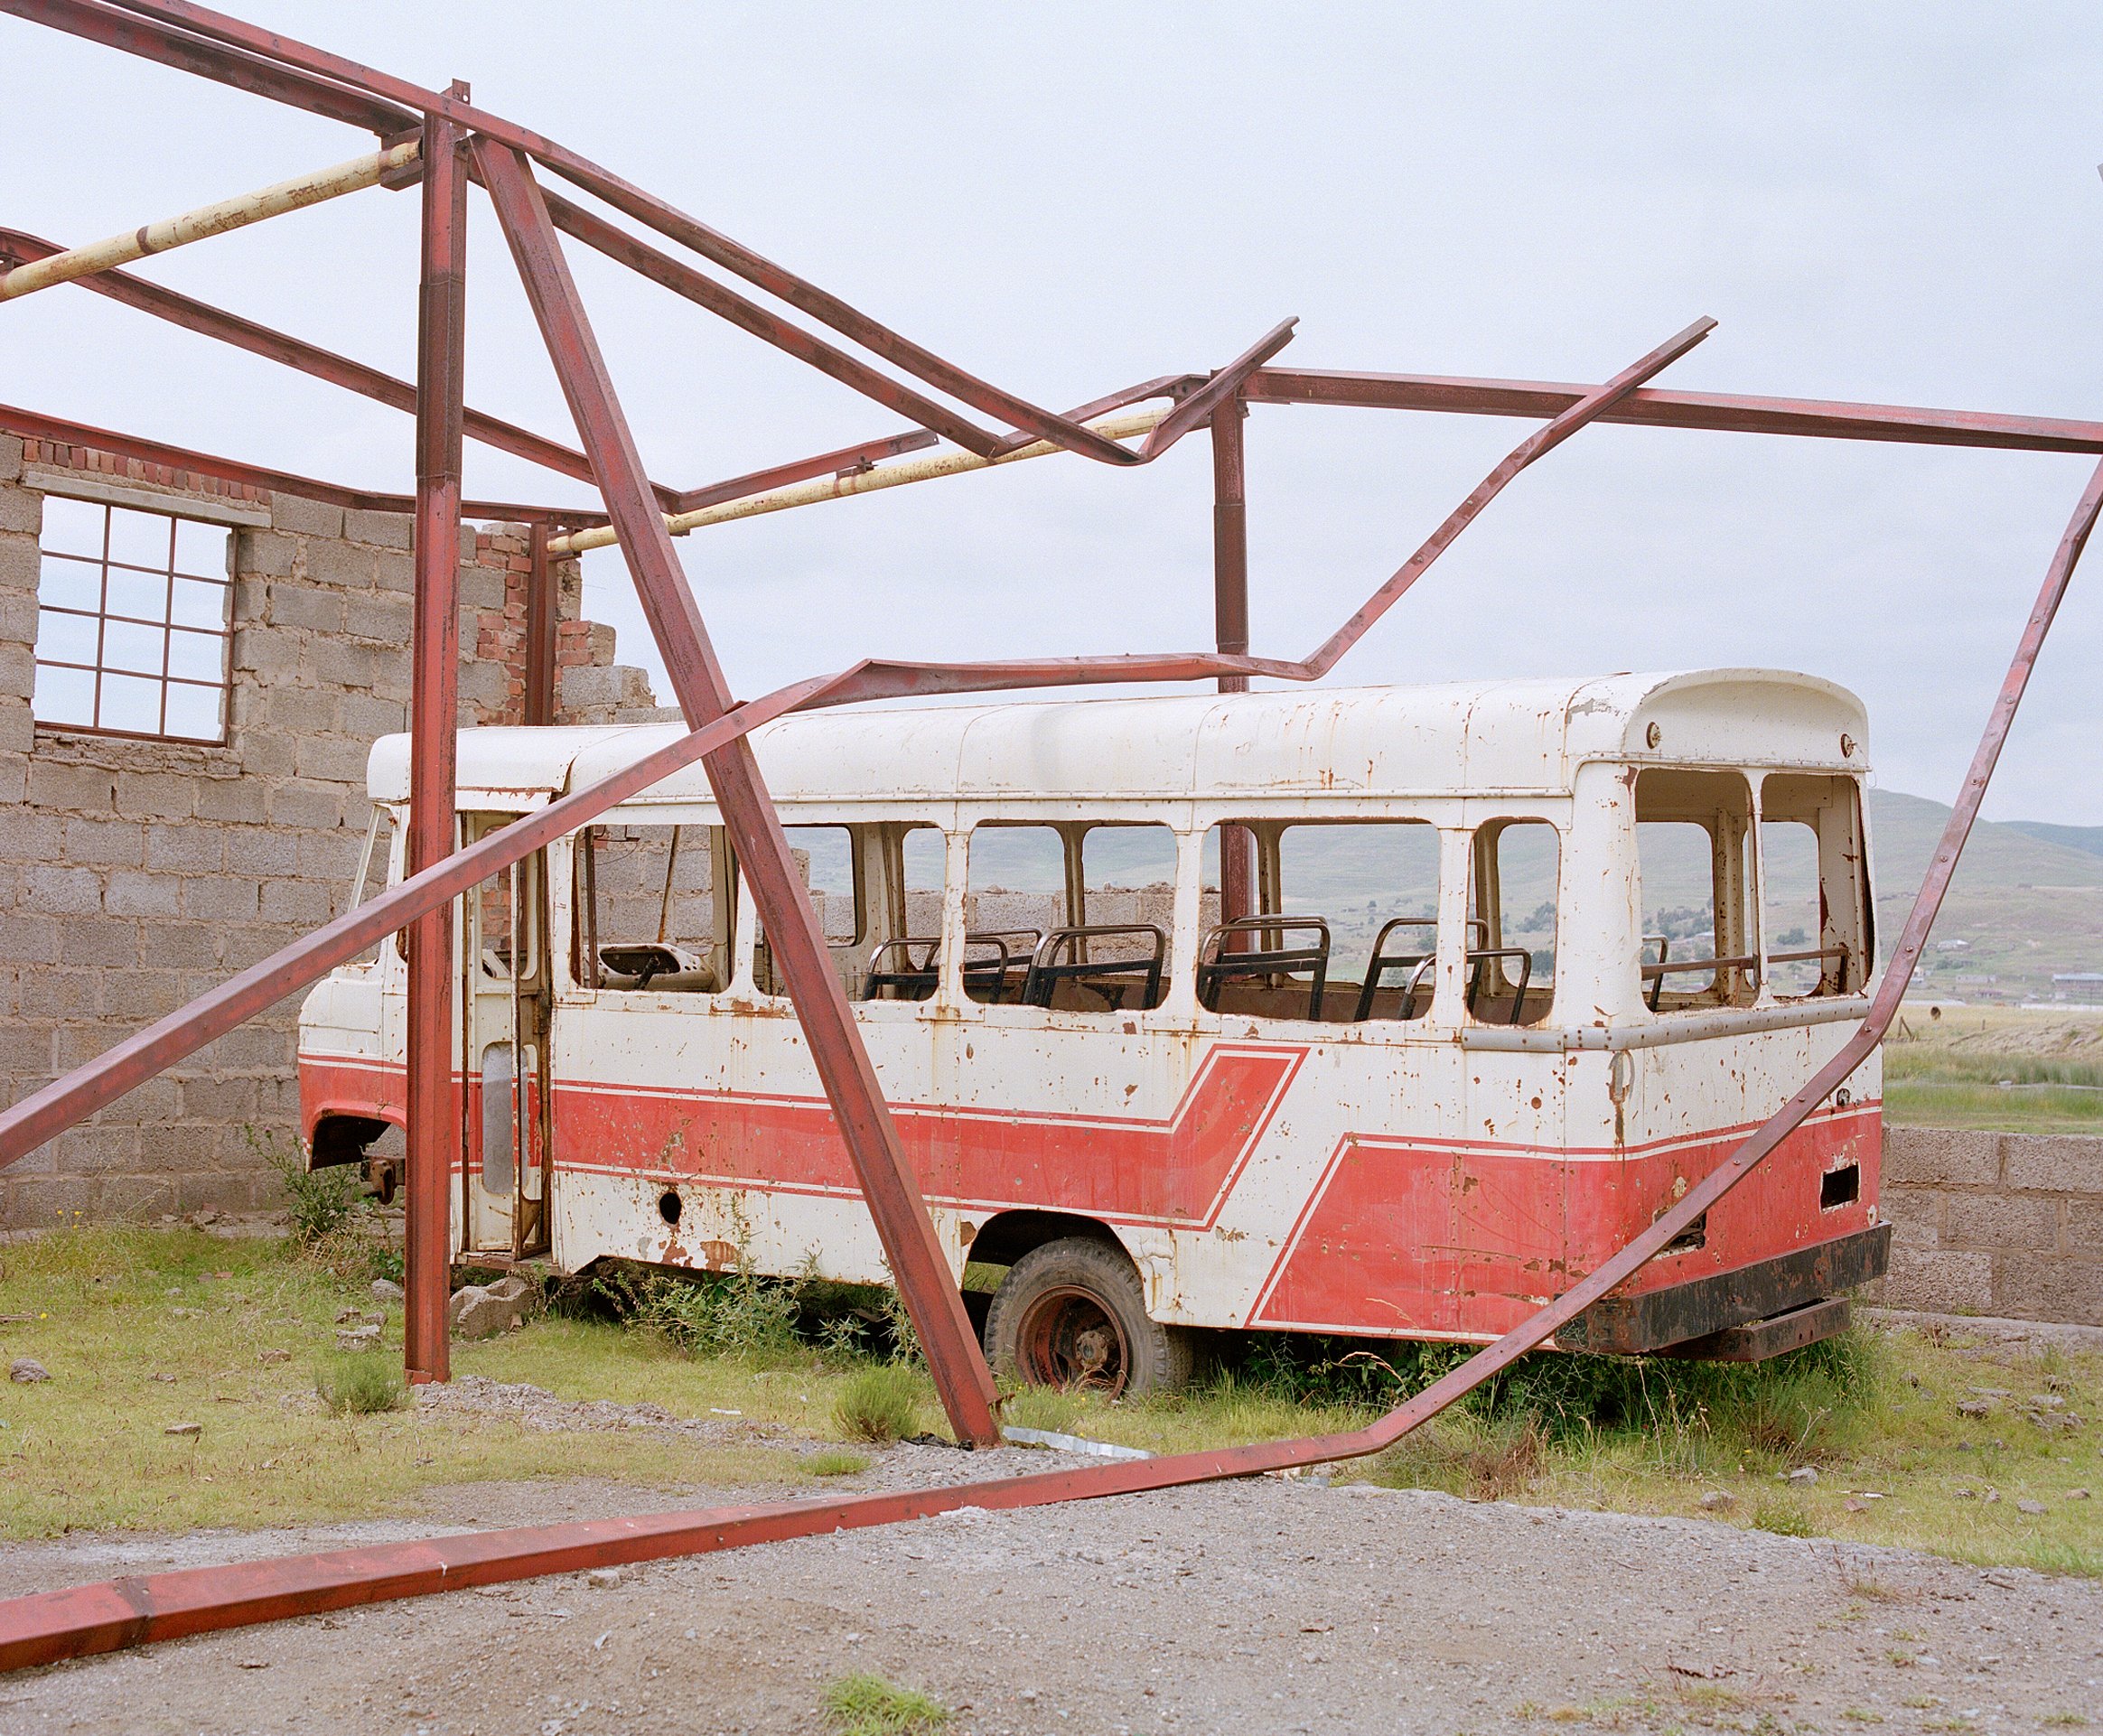  Abandoned Bus  Goodleaf x Altitude   Producing cannabis for medical and beauty products in the mountains of Lesotho 